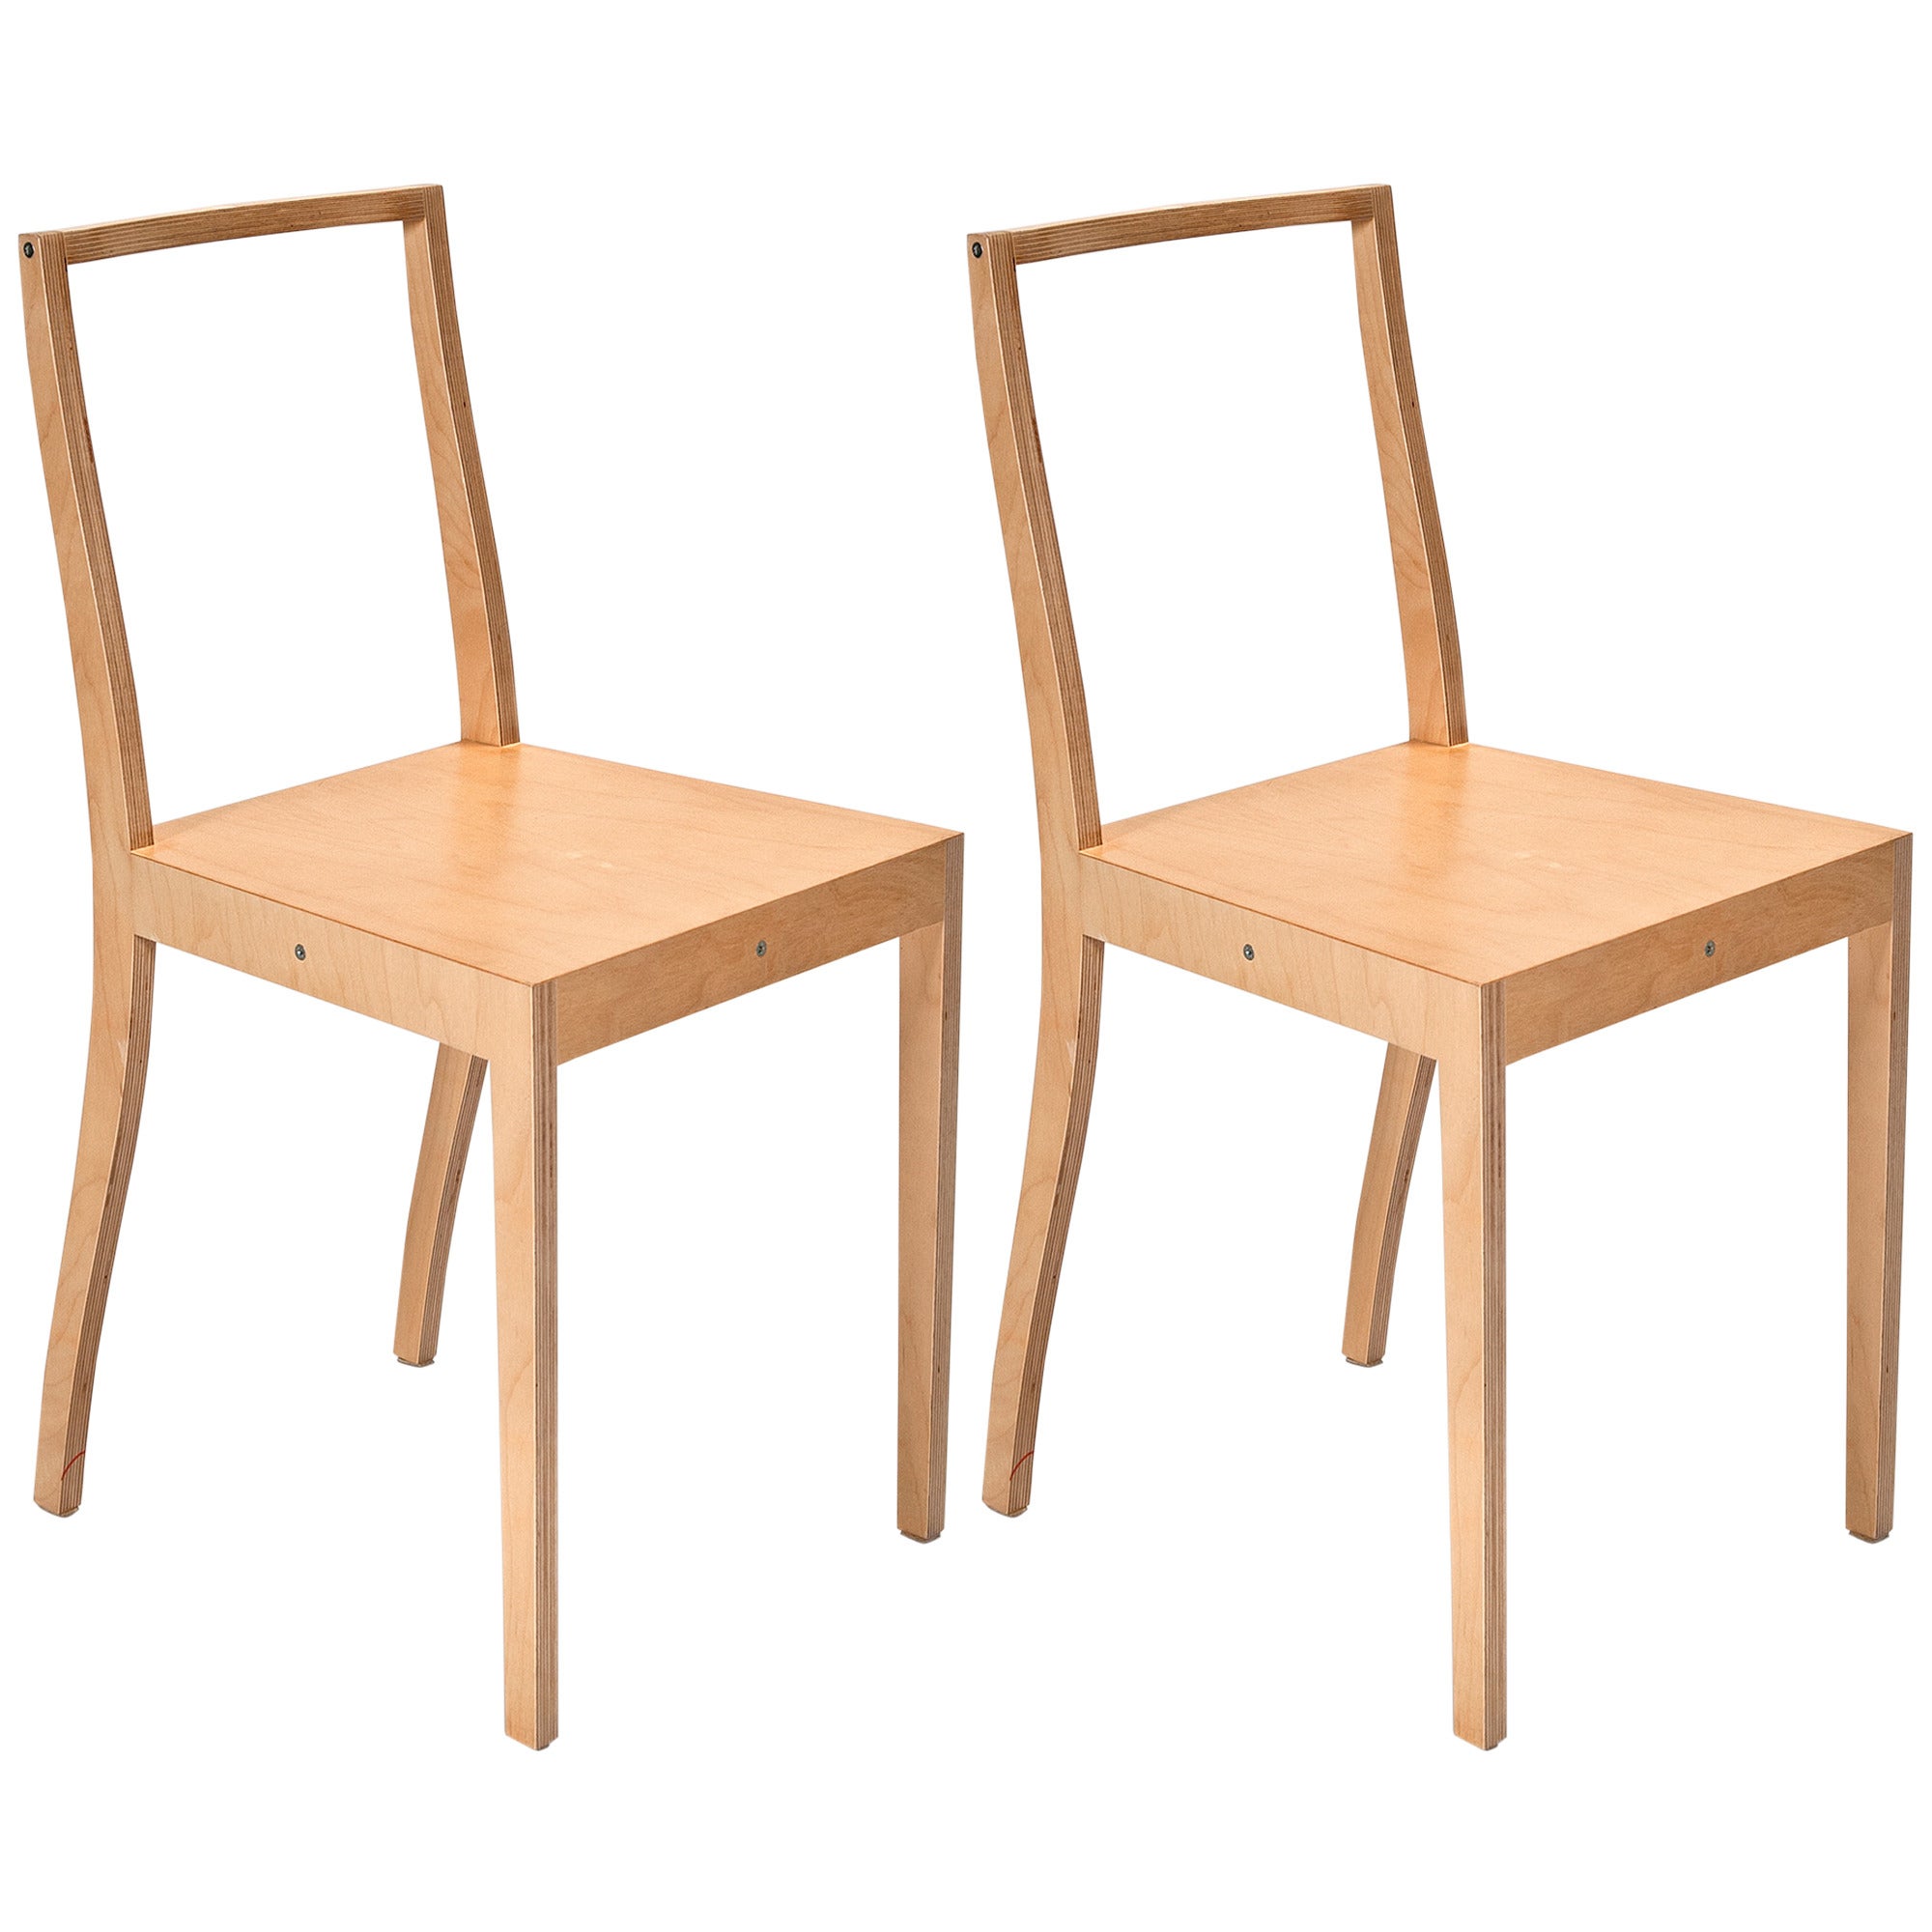 Ply-Chair Open Back Pair of Chairs by Jasper Morrison for Vitra